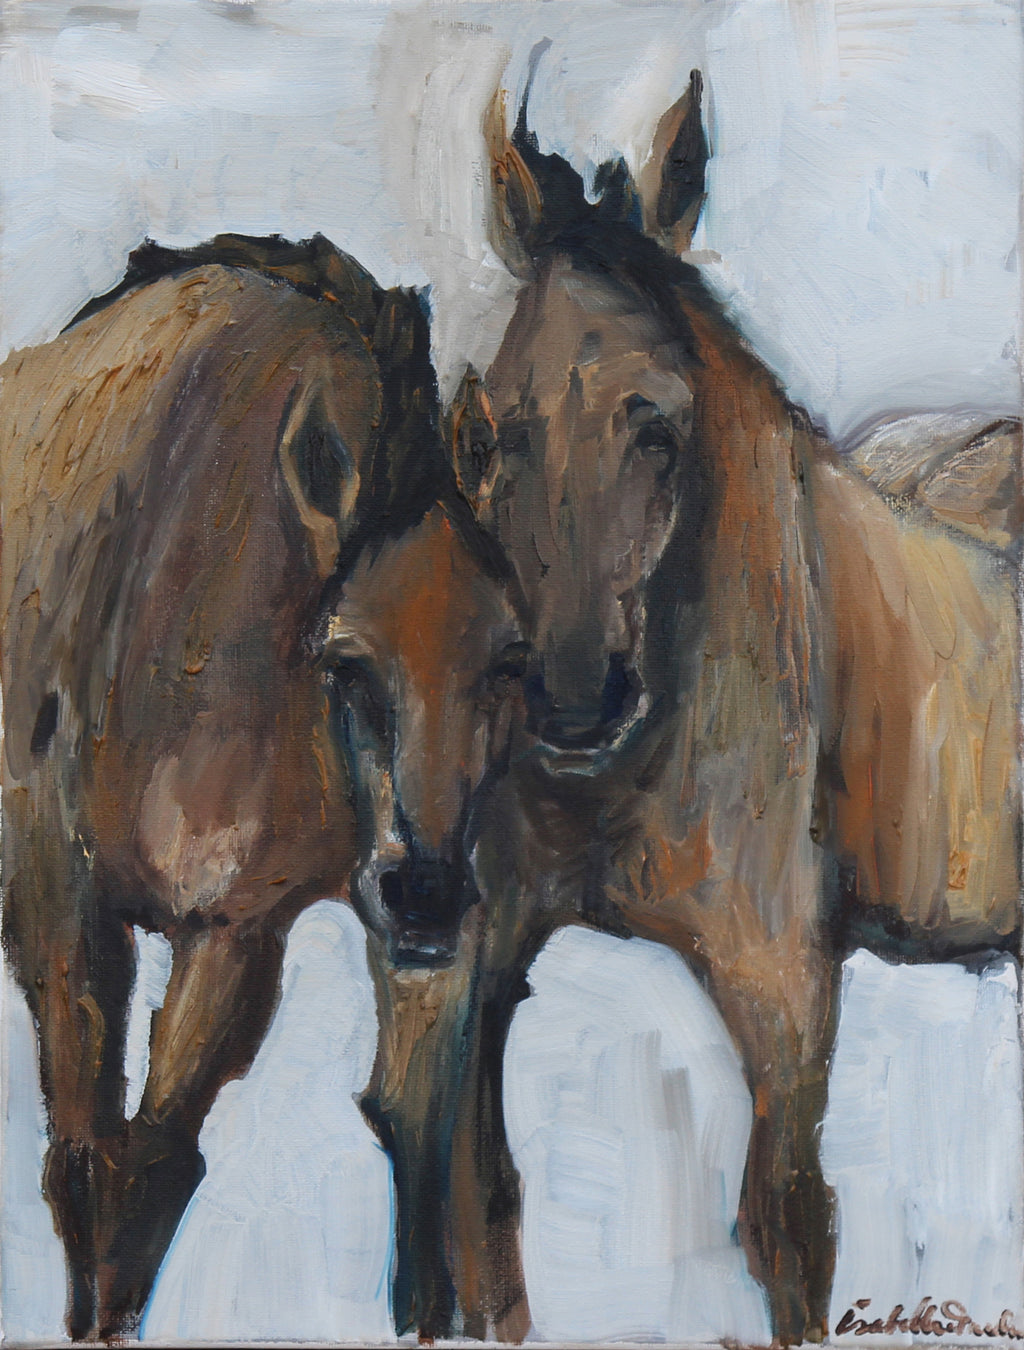 Truth. Horses only know to be honest. Highly textured and expressive original oil painting of horses in the wild.